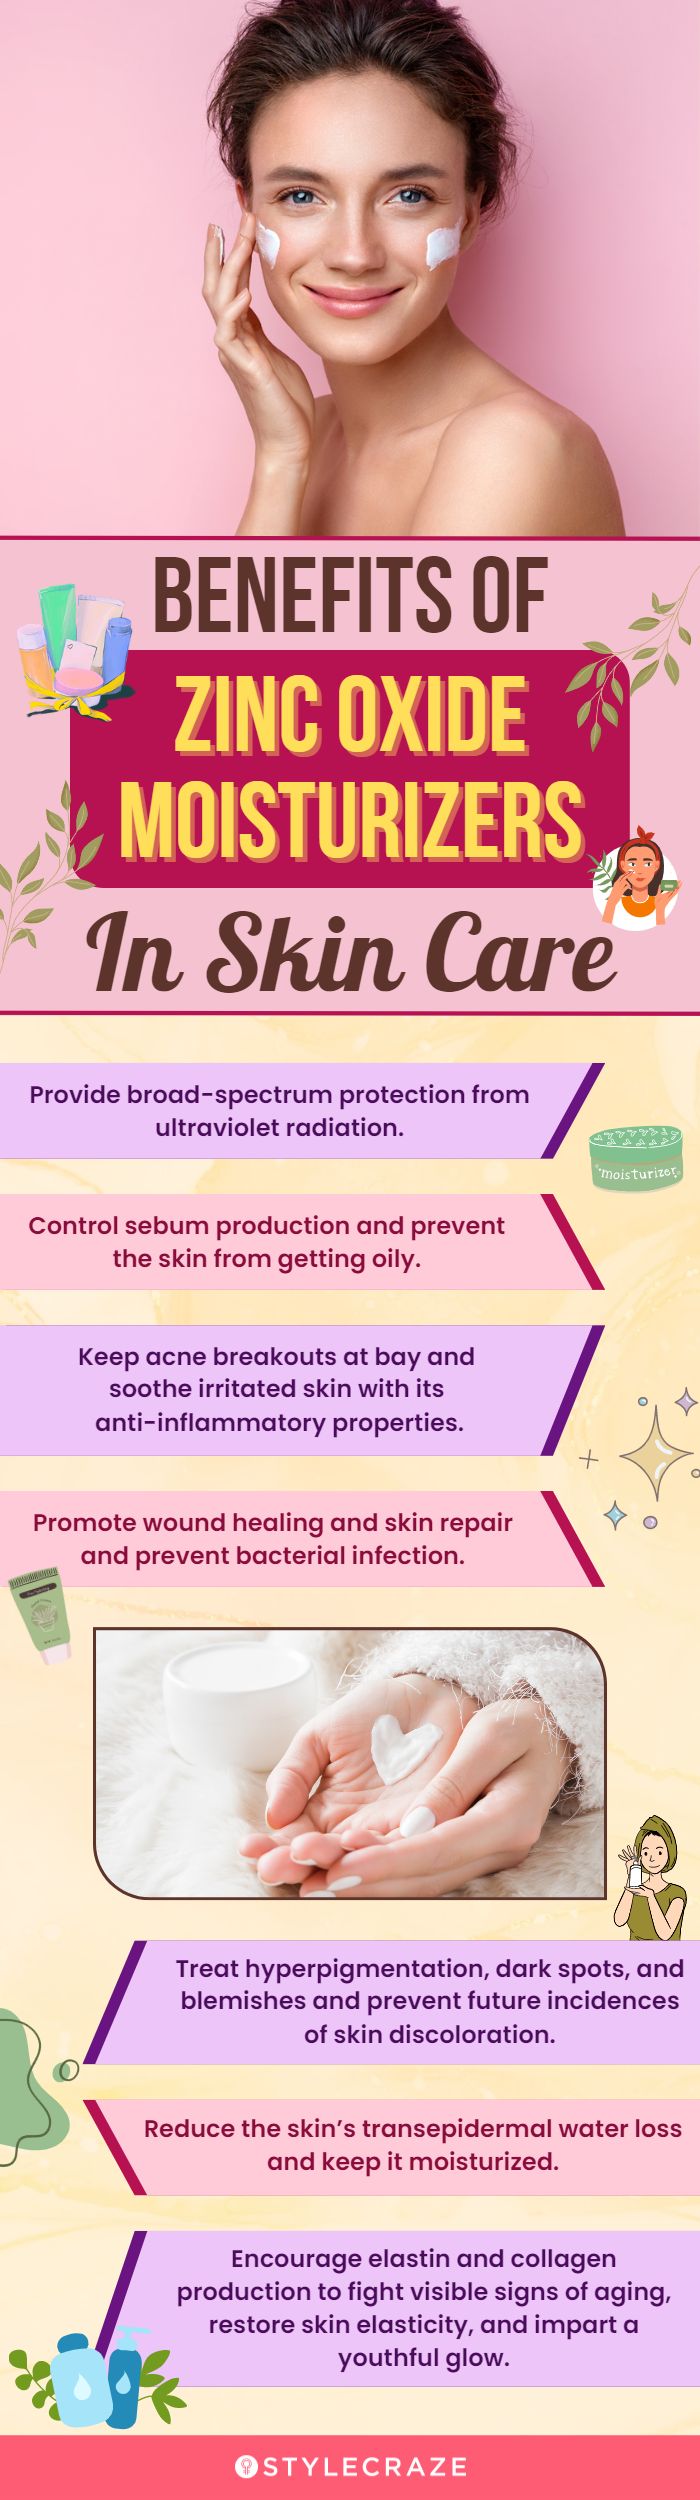 Benefits Of Zinc Oxide Moisturizers In Skin Care (infographic)